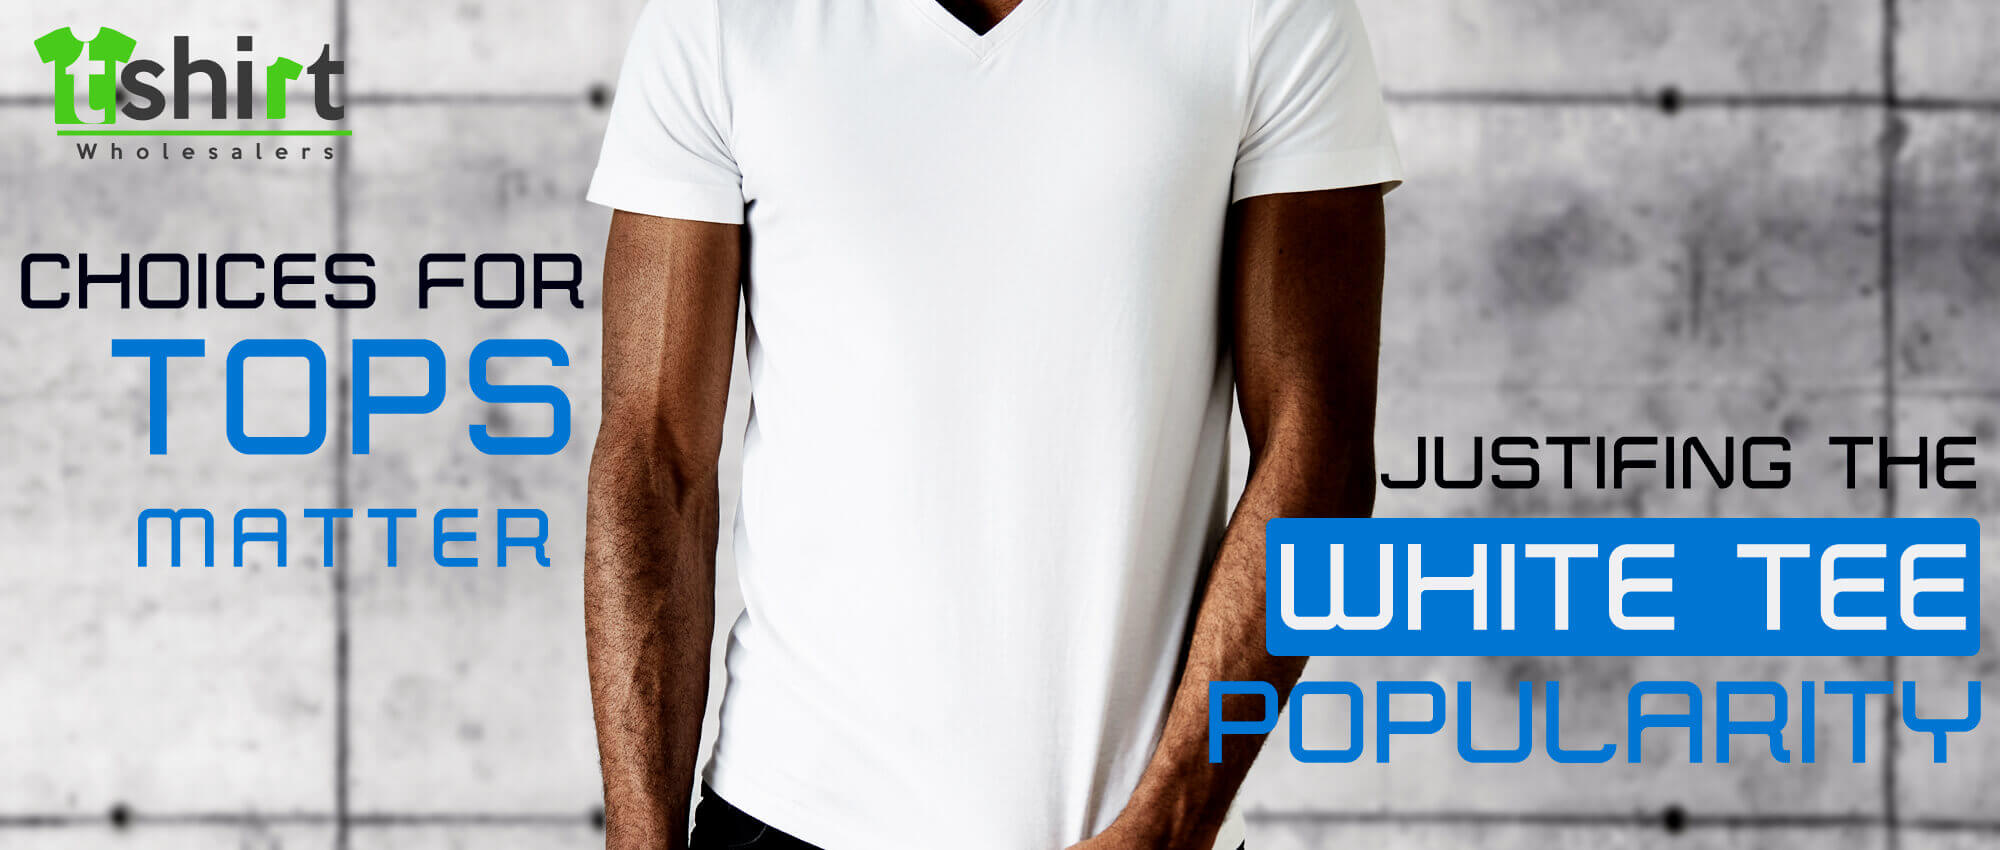 CHOICES FOR TOPS MATTER: JUSTIFYING THE WHITE TEE POPULARITY